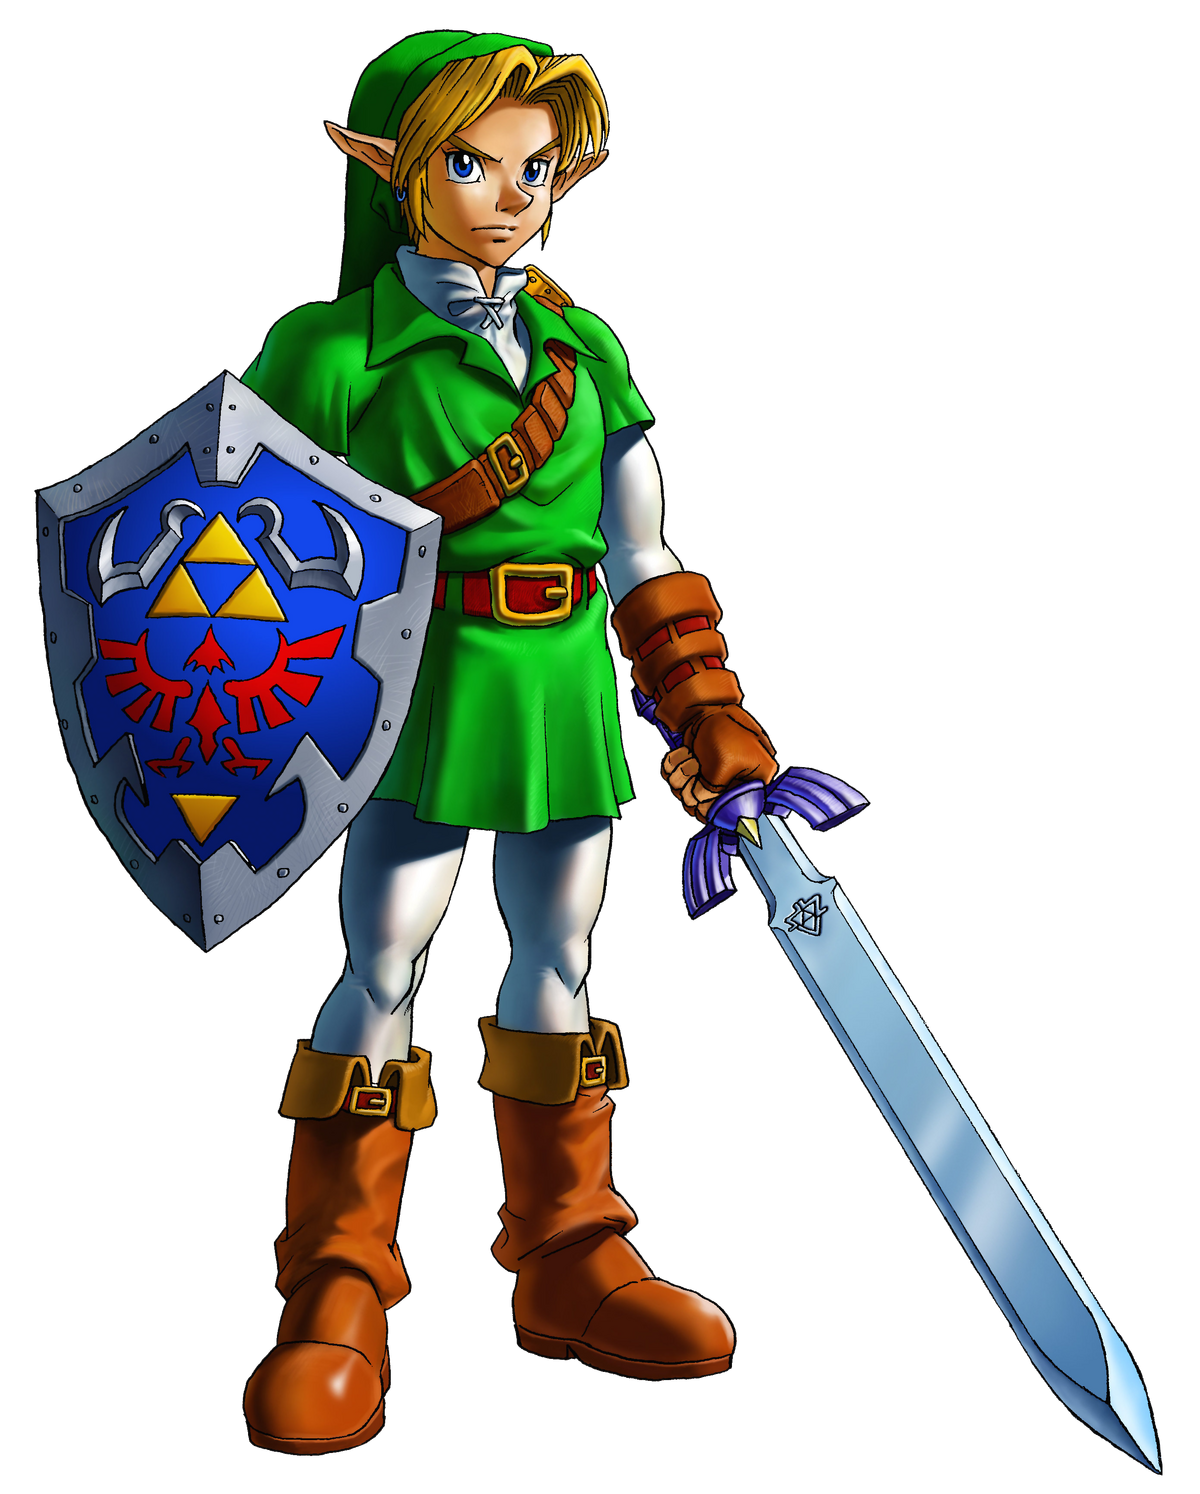 Zelda Ocarina Of Time Characters / Weapons / Items Card From Strategy Guide